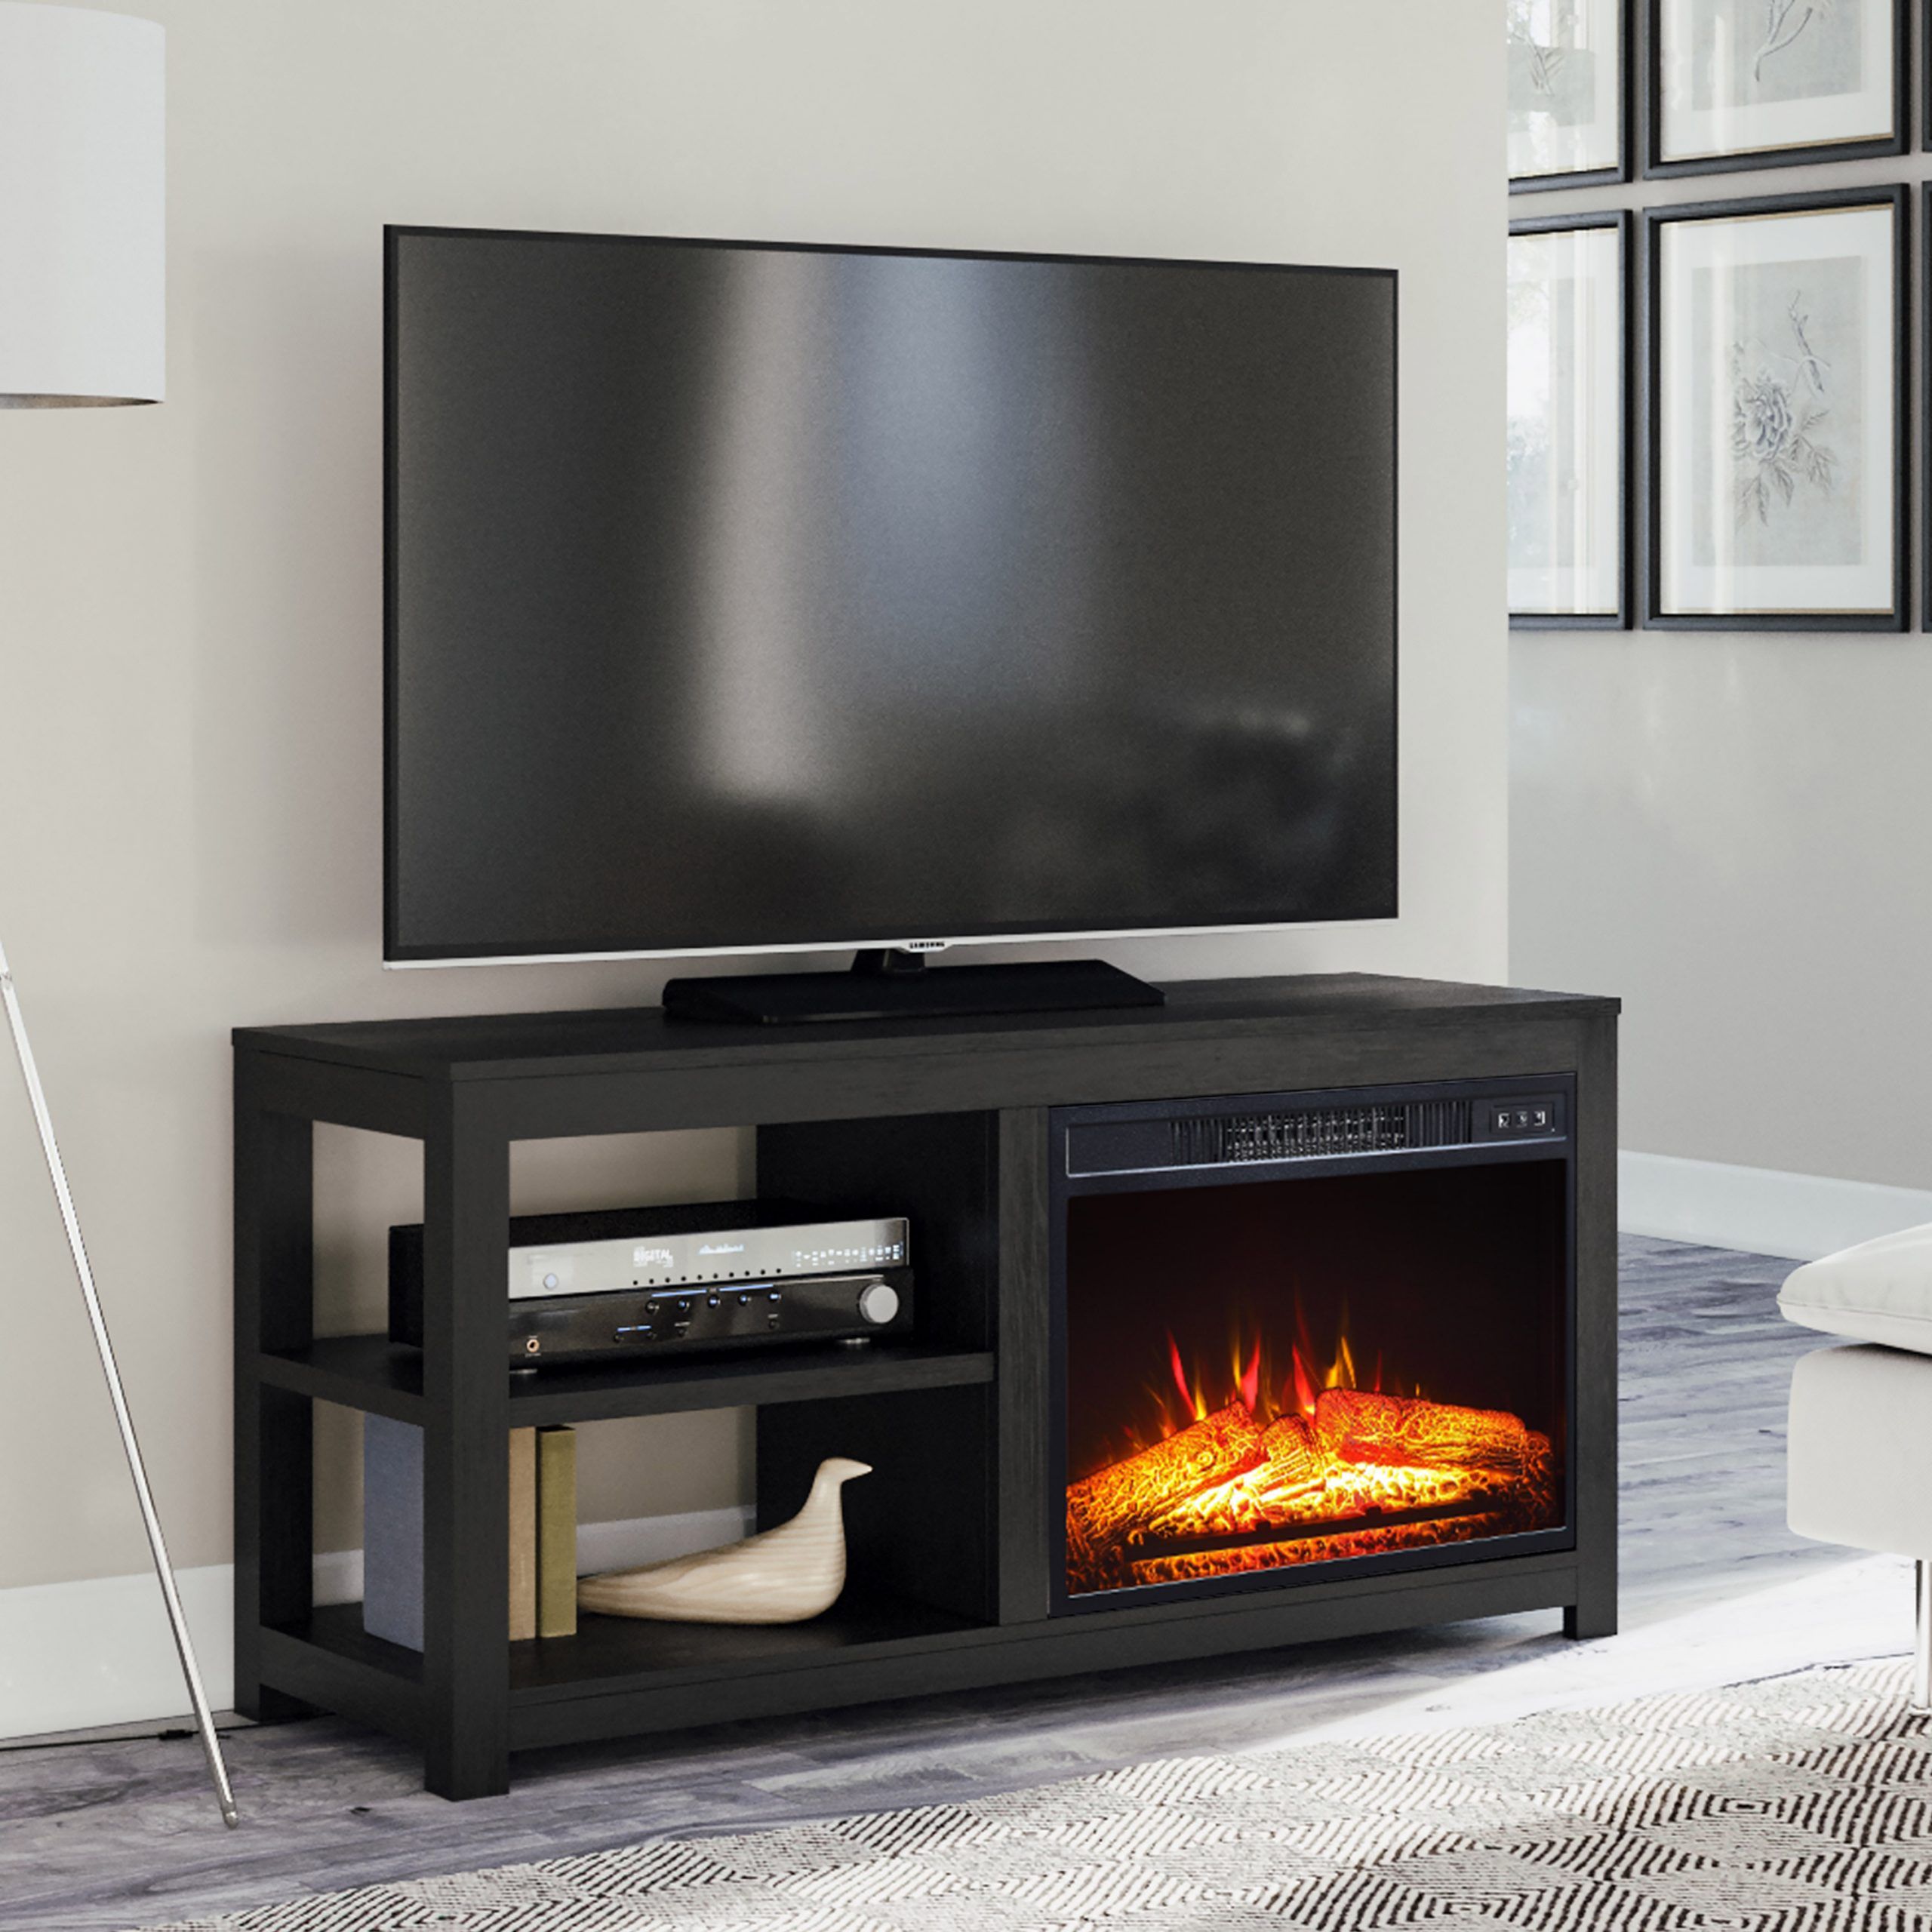 Mainstays 2 Shelf Media Fireplace Tv Stand For Flat Panel In Oak Tv Cabinets For Flat Screens (Photo 5 of 12)